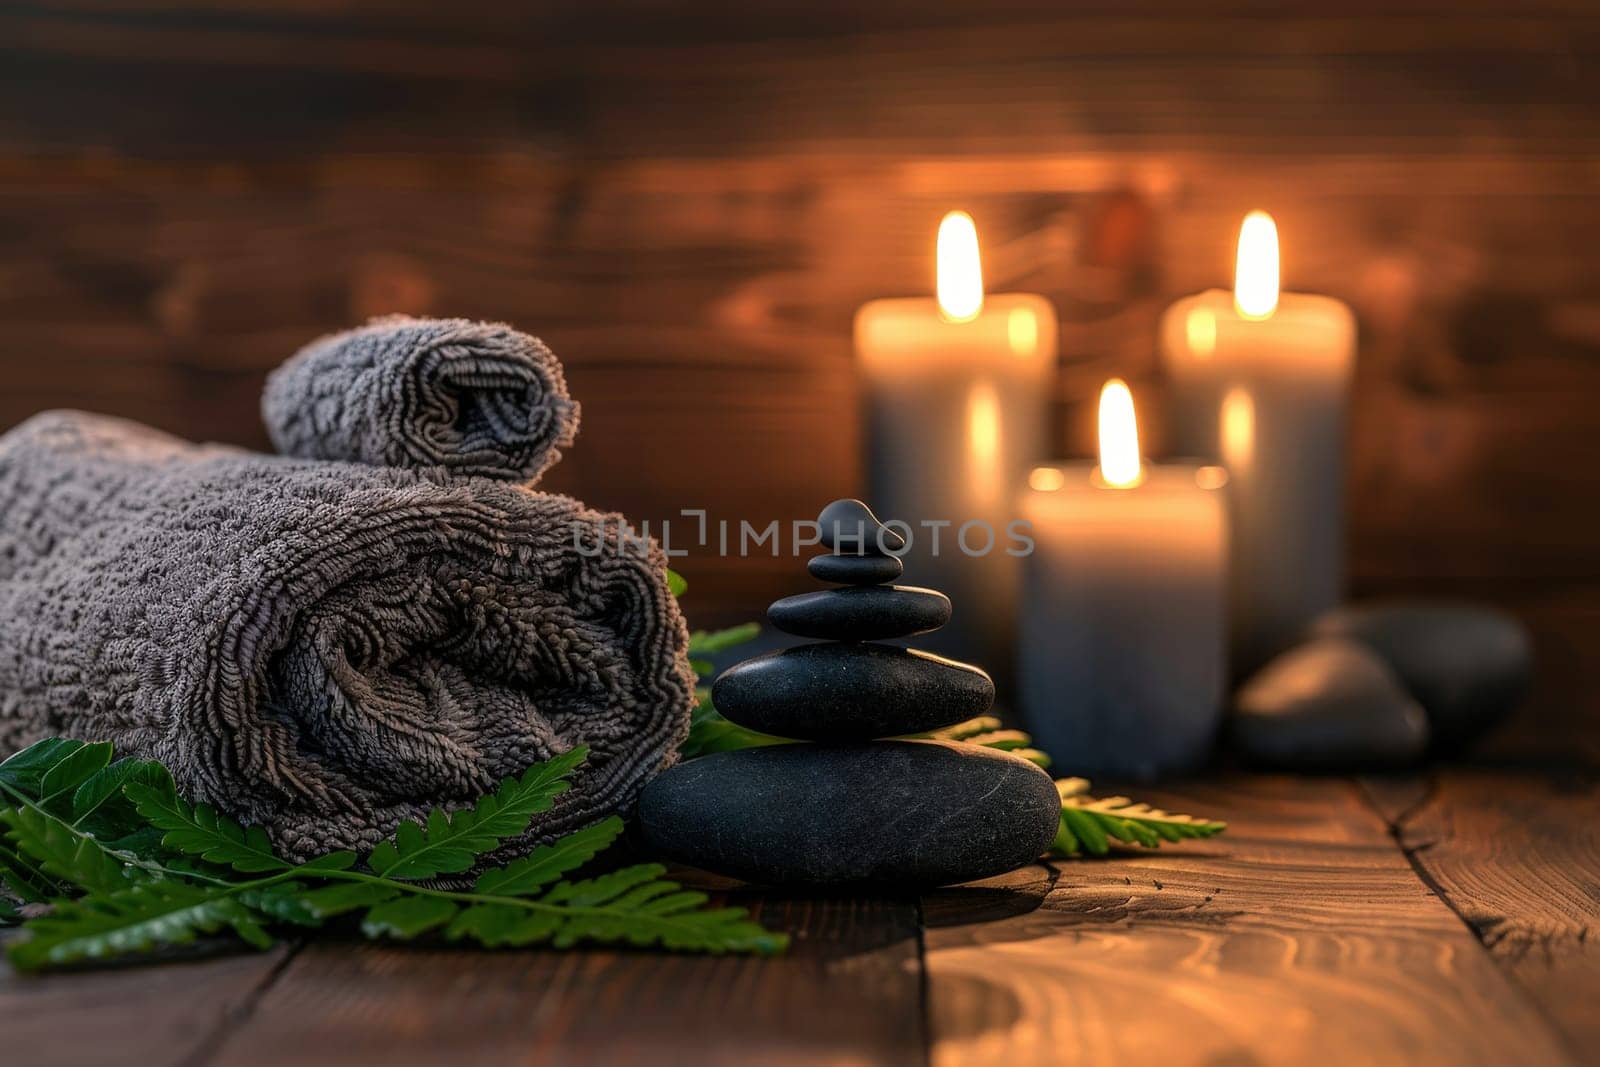 Candles and black hot stone on wooden background. Hot stone massage setting lit by candles.